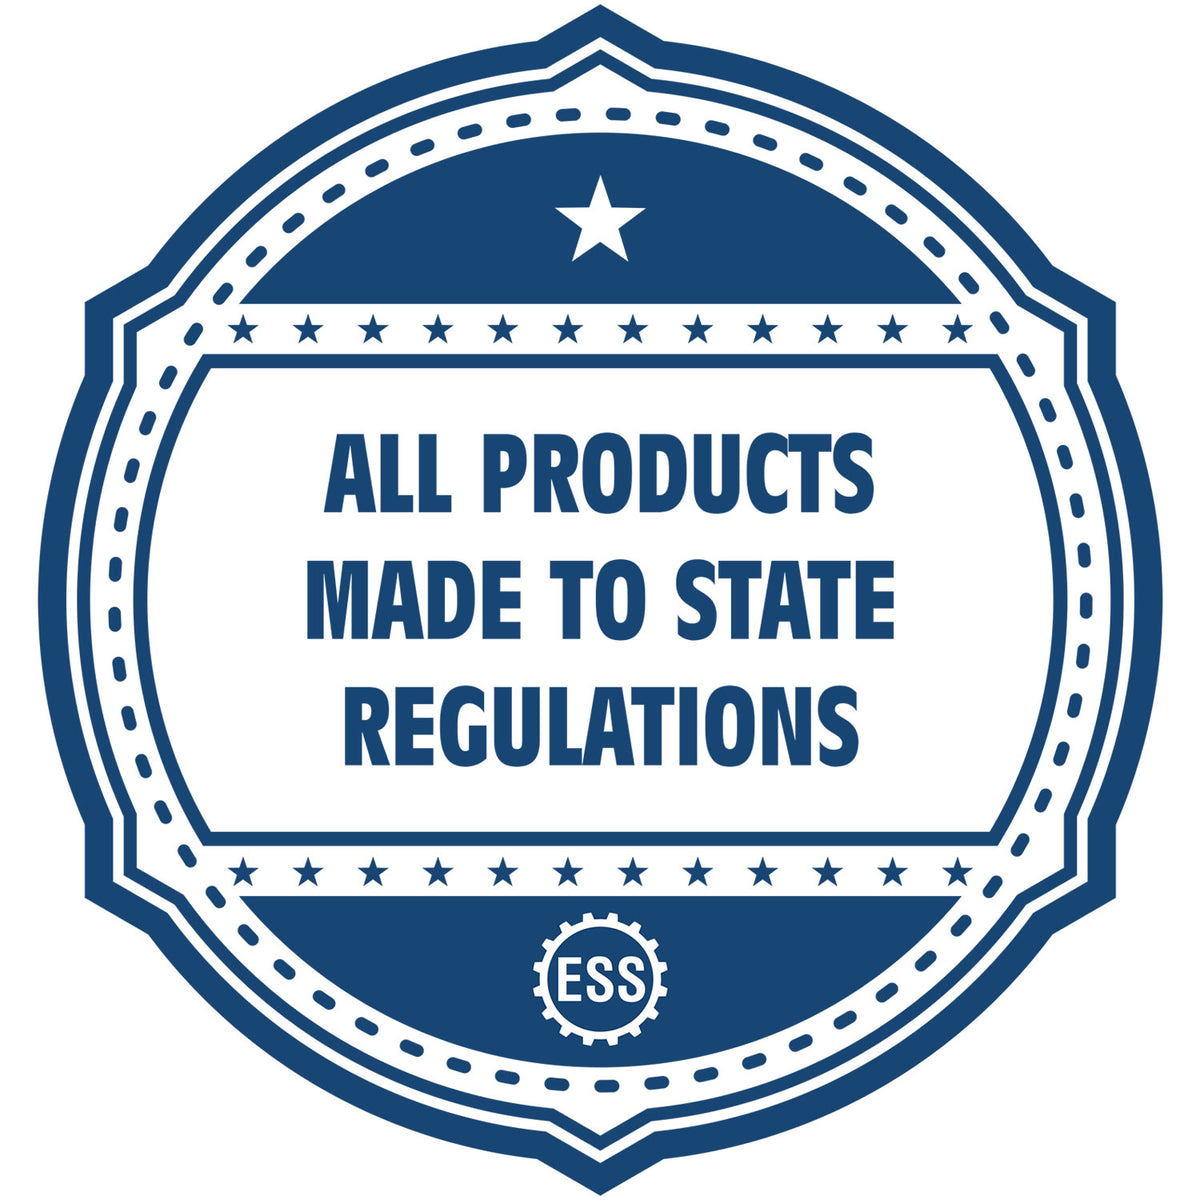 An icon or badge element for the MaxLight Premium Pre-Inked West Virginia State Seal Notarial Stamp showing that this product is made in compliance with state regulations.